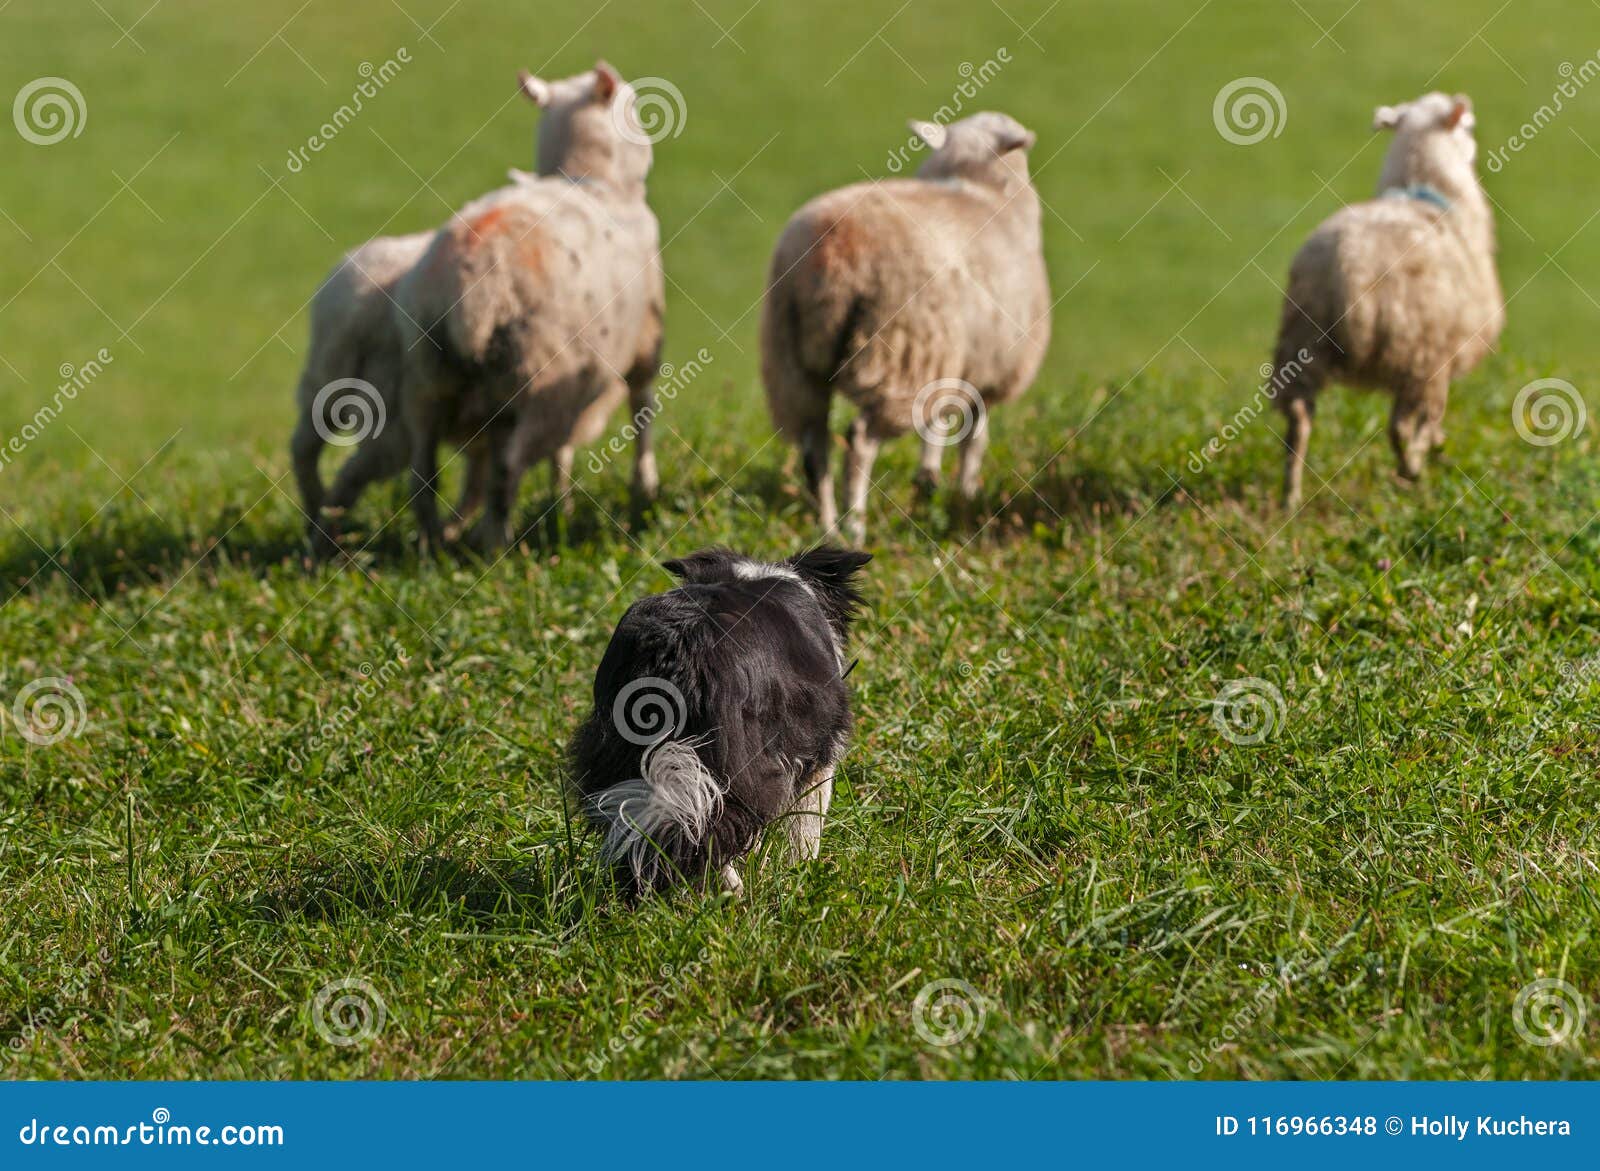 stock dog moves group of sheep ovis aries out into field